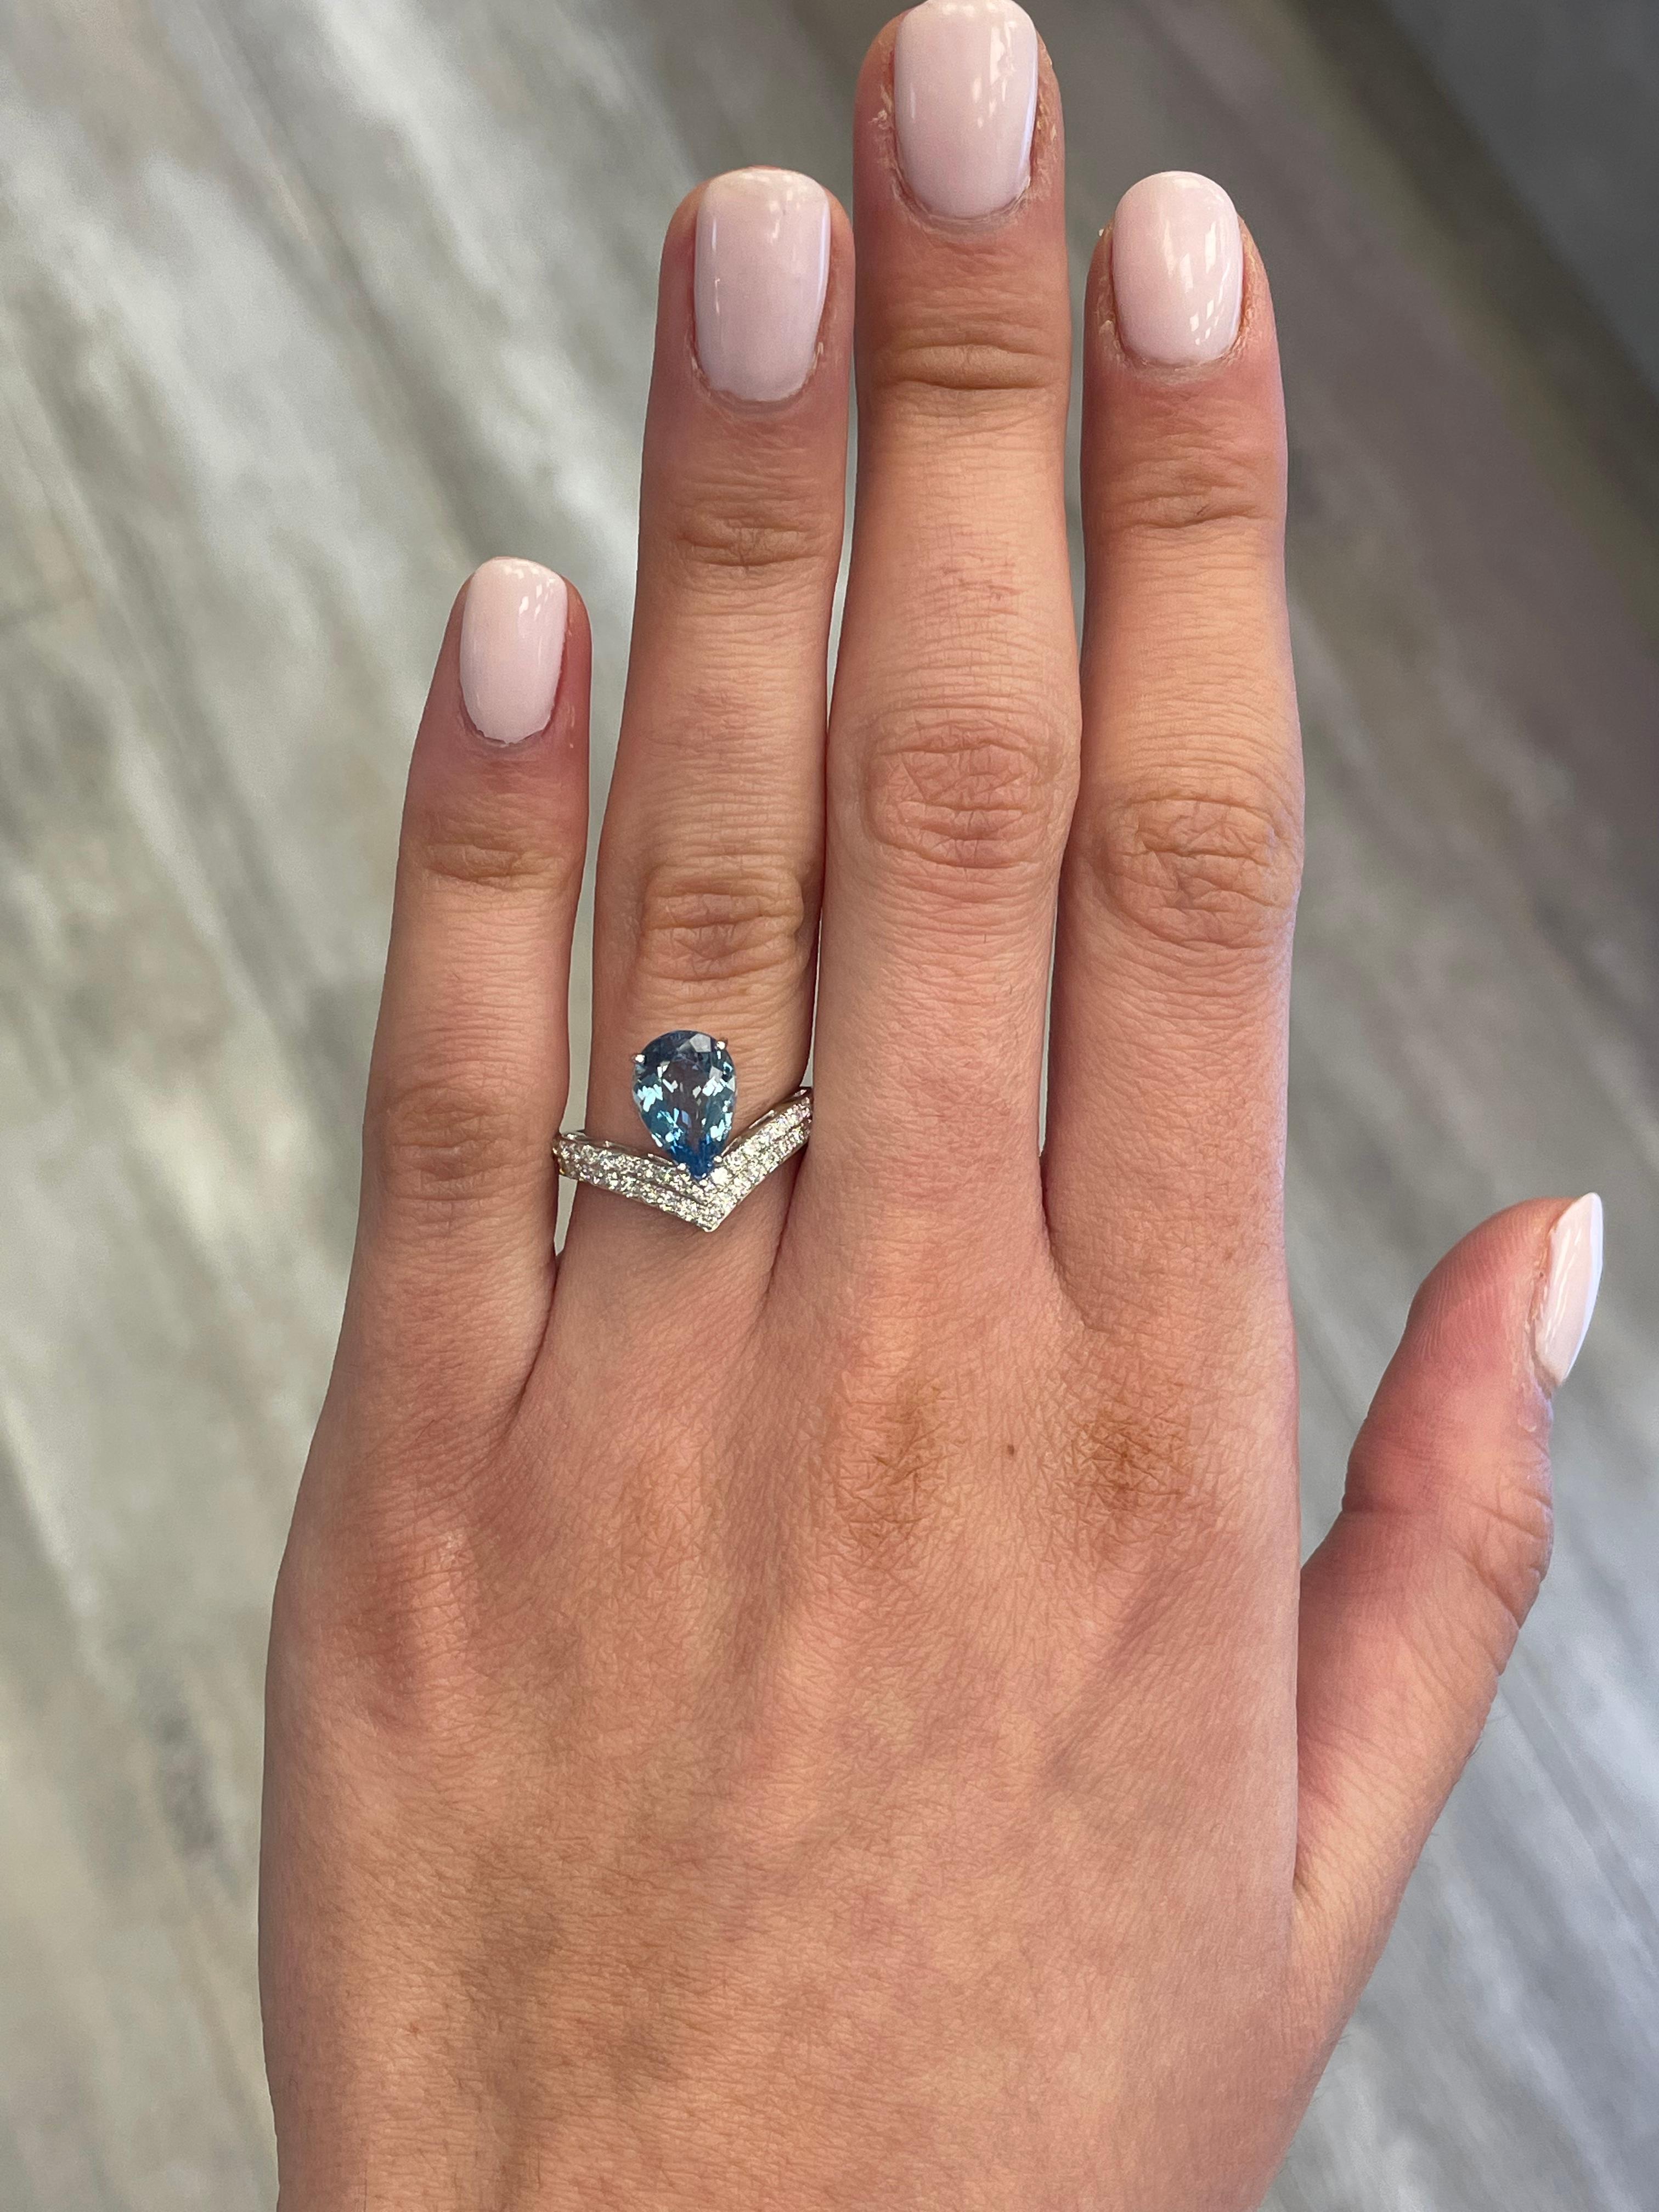 Stunning aquamarine and diamond ring, by Alexander Beverly Hills.
1 pear aquamarine, 1.60 carats. Complimented by 42 round brilliant diamonds, 0.42 carats. Approximately D-F color and SI clarity. 18-karat white gold, 3.65 grams, 5.75 ring